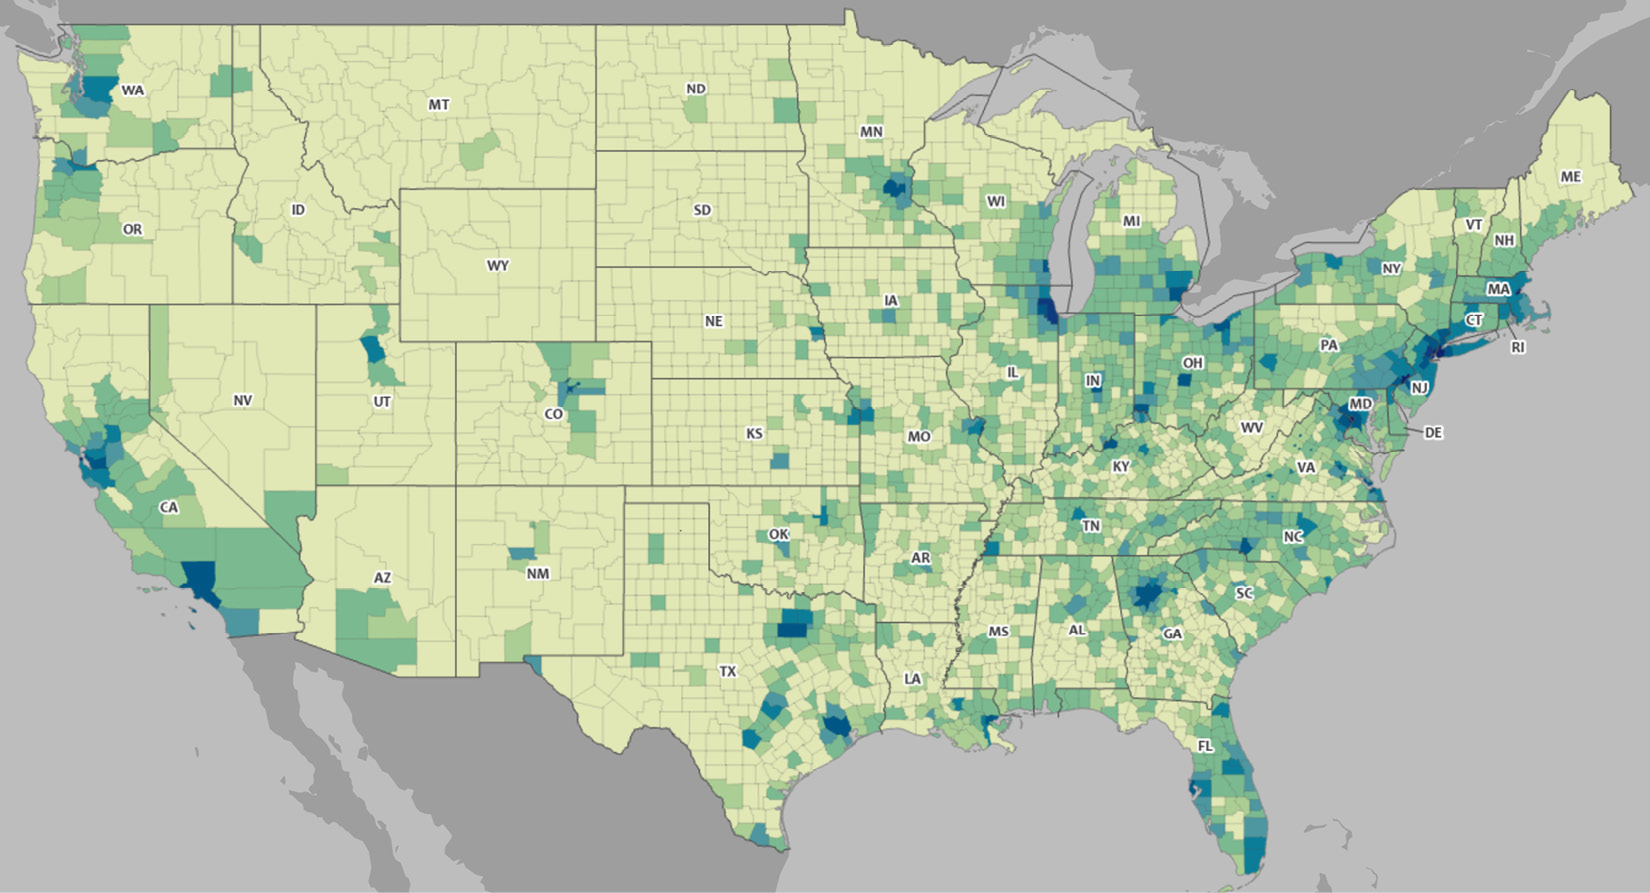 Figure 17.1 – US demographic data map at a county level 
